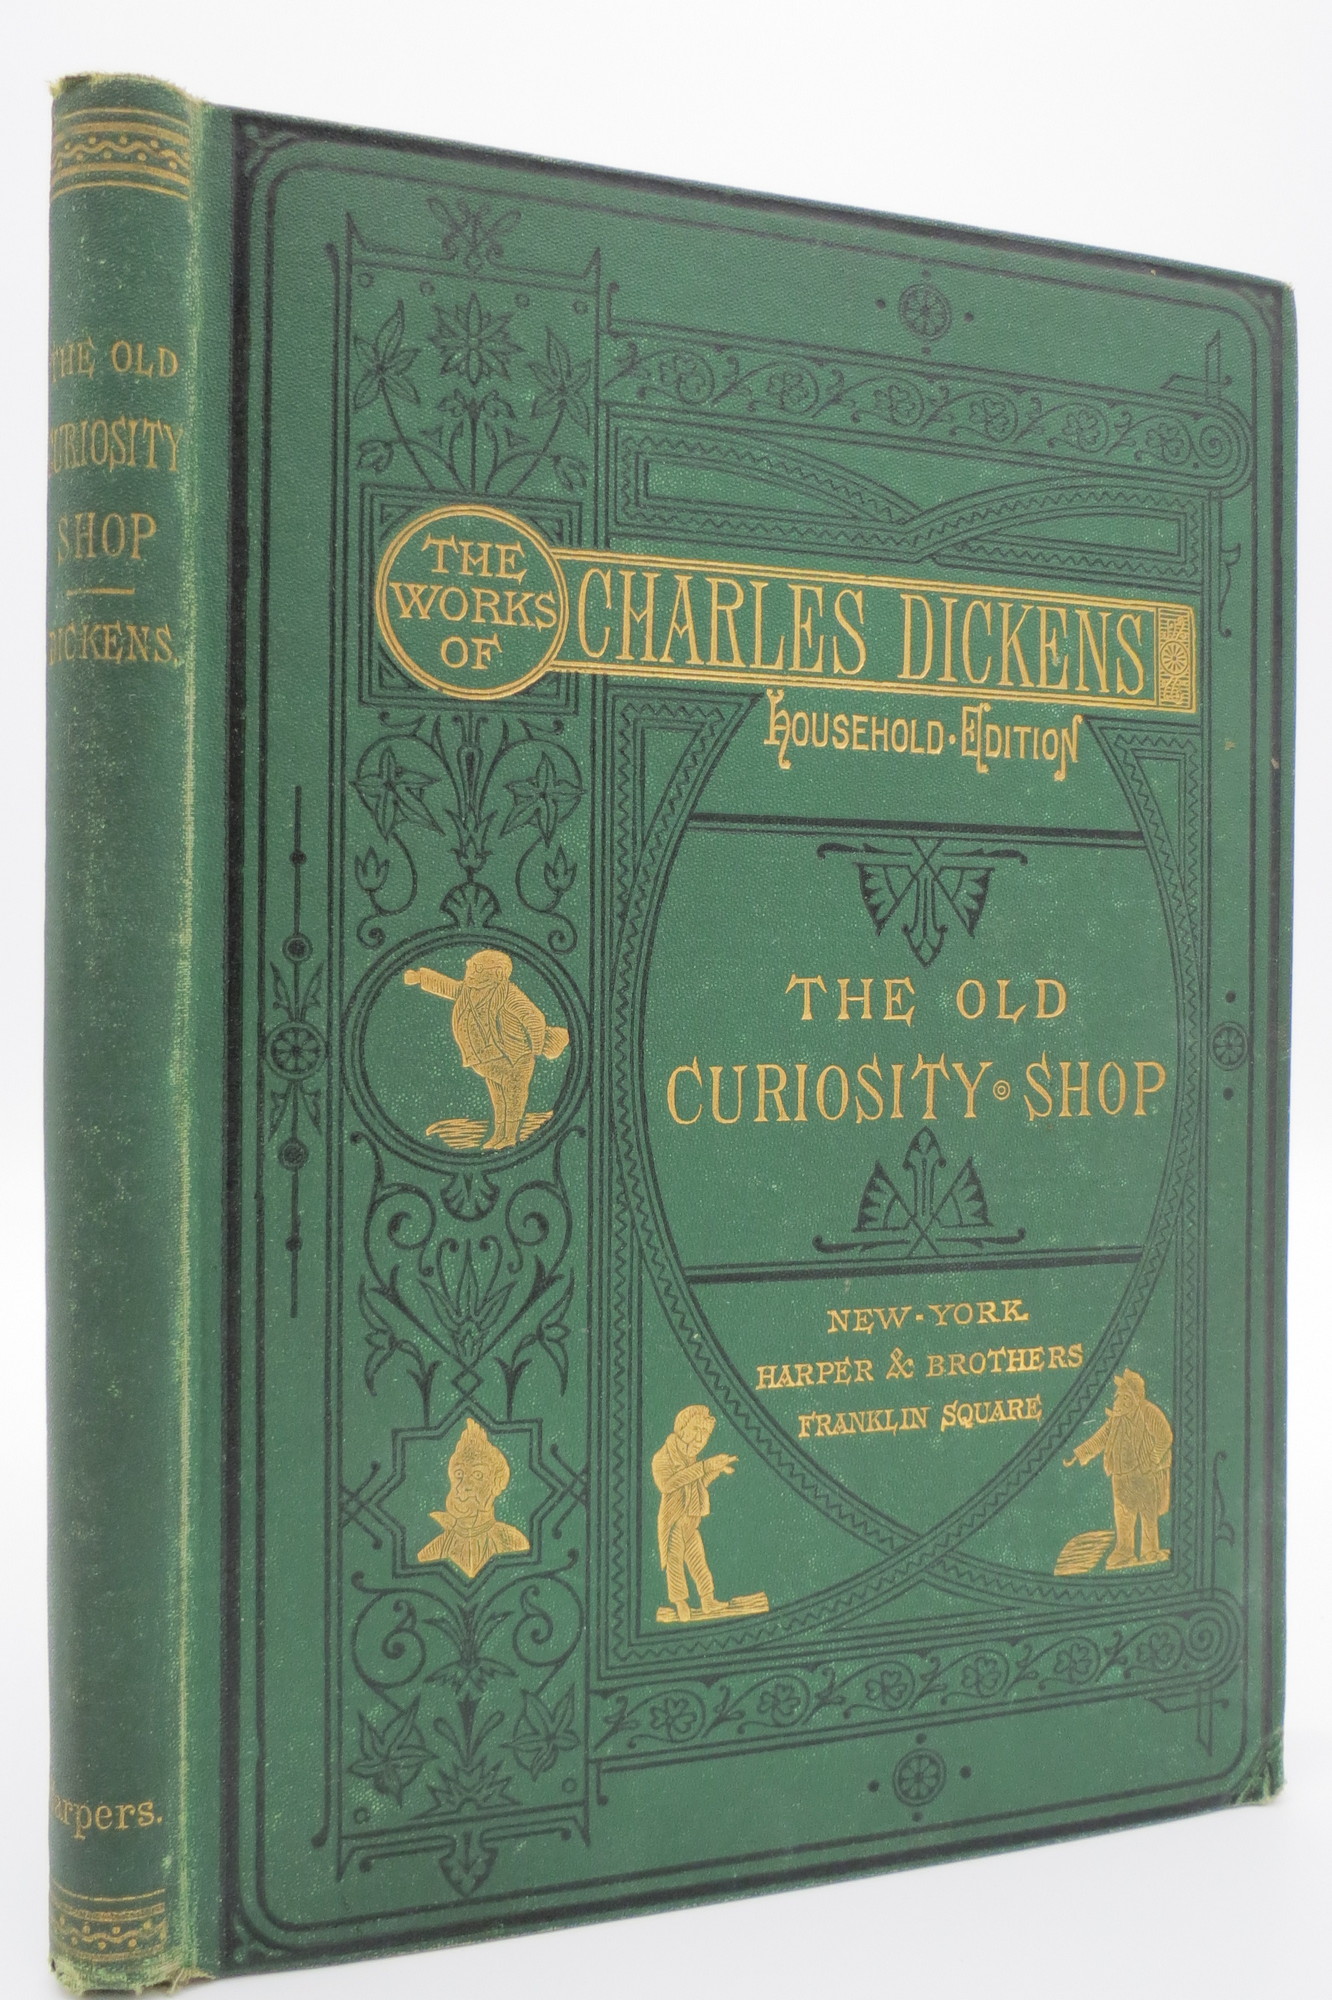 Image for THE OLD CURIOSITY SHOP (FROM THE WORKS OF CHARLES DICKENS HOUSEHOLD EDITION)   (Fine Victorian Binding)